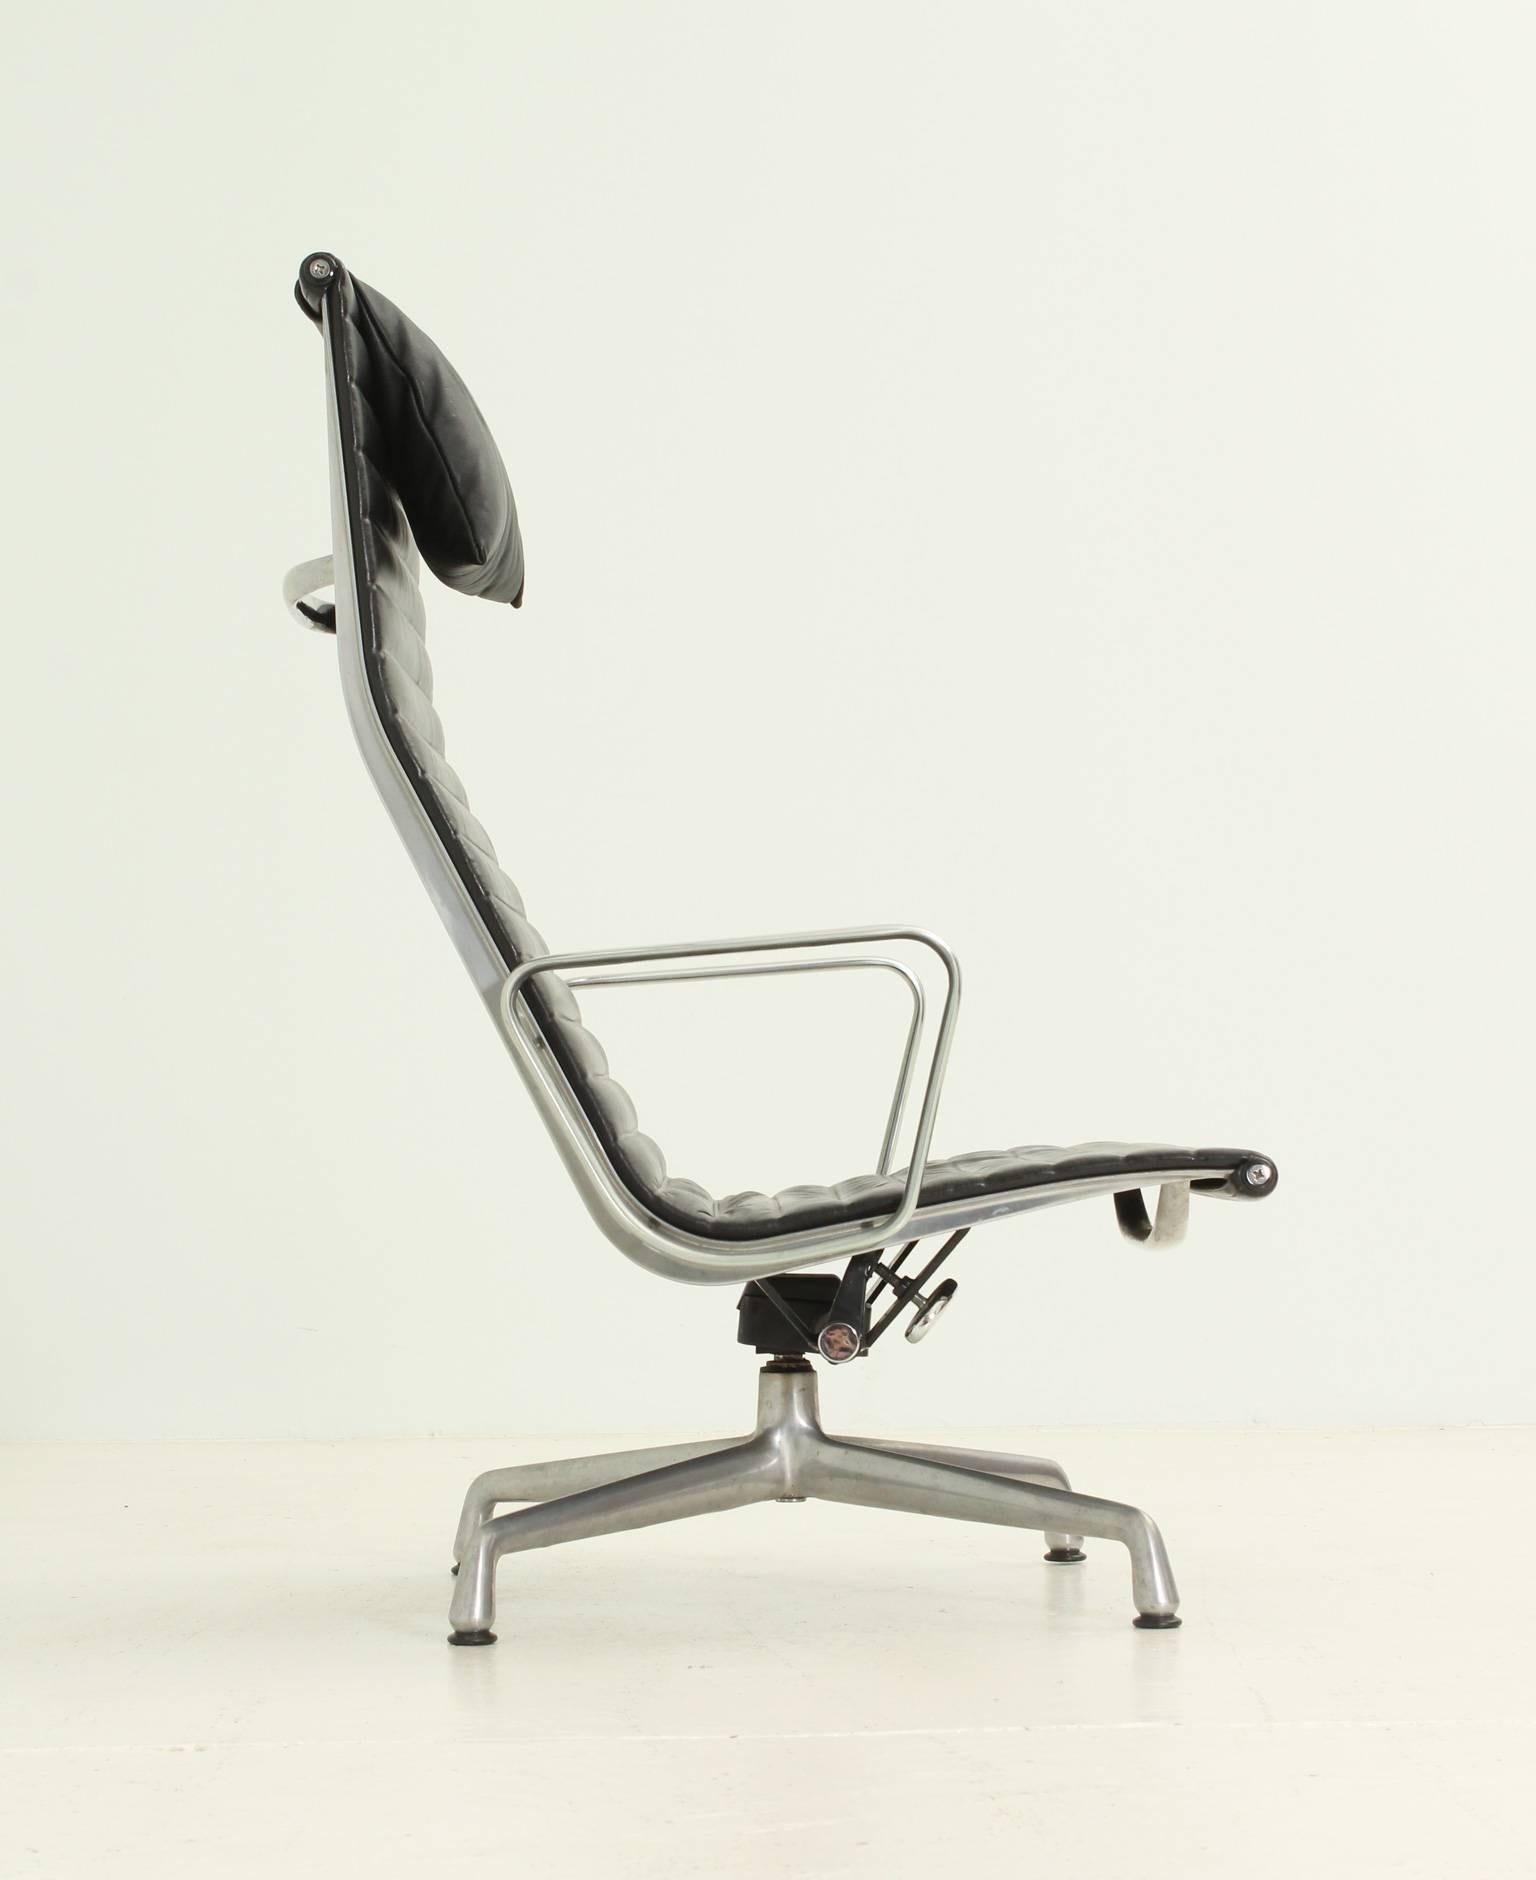 Aluminium Group lounge chair model EA124 designed by Charles and Ray Eames for Herman Miller, USA, 1958. Polished aluminium frame upholstered in black leather, swivel and adjustable.